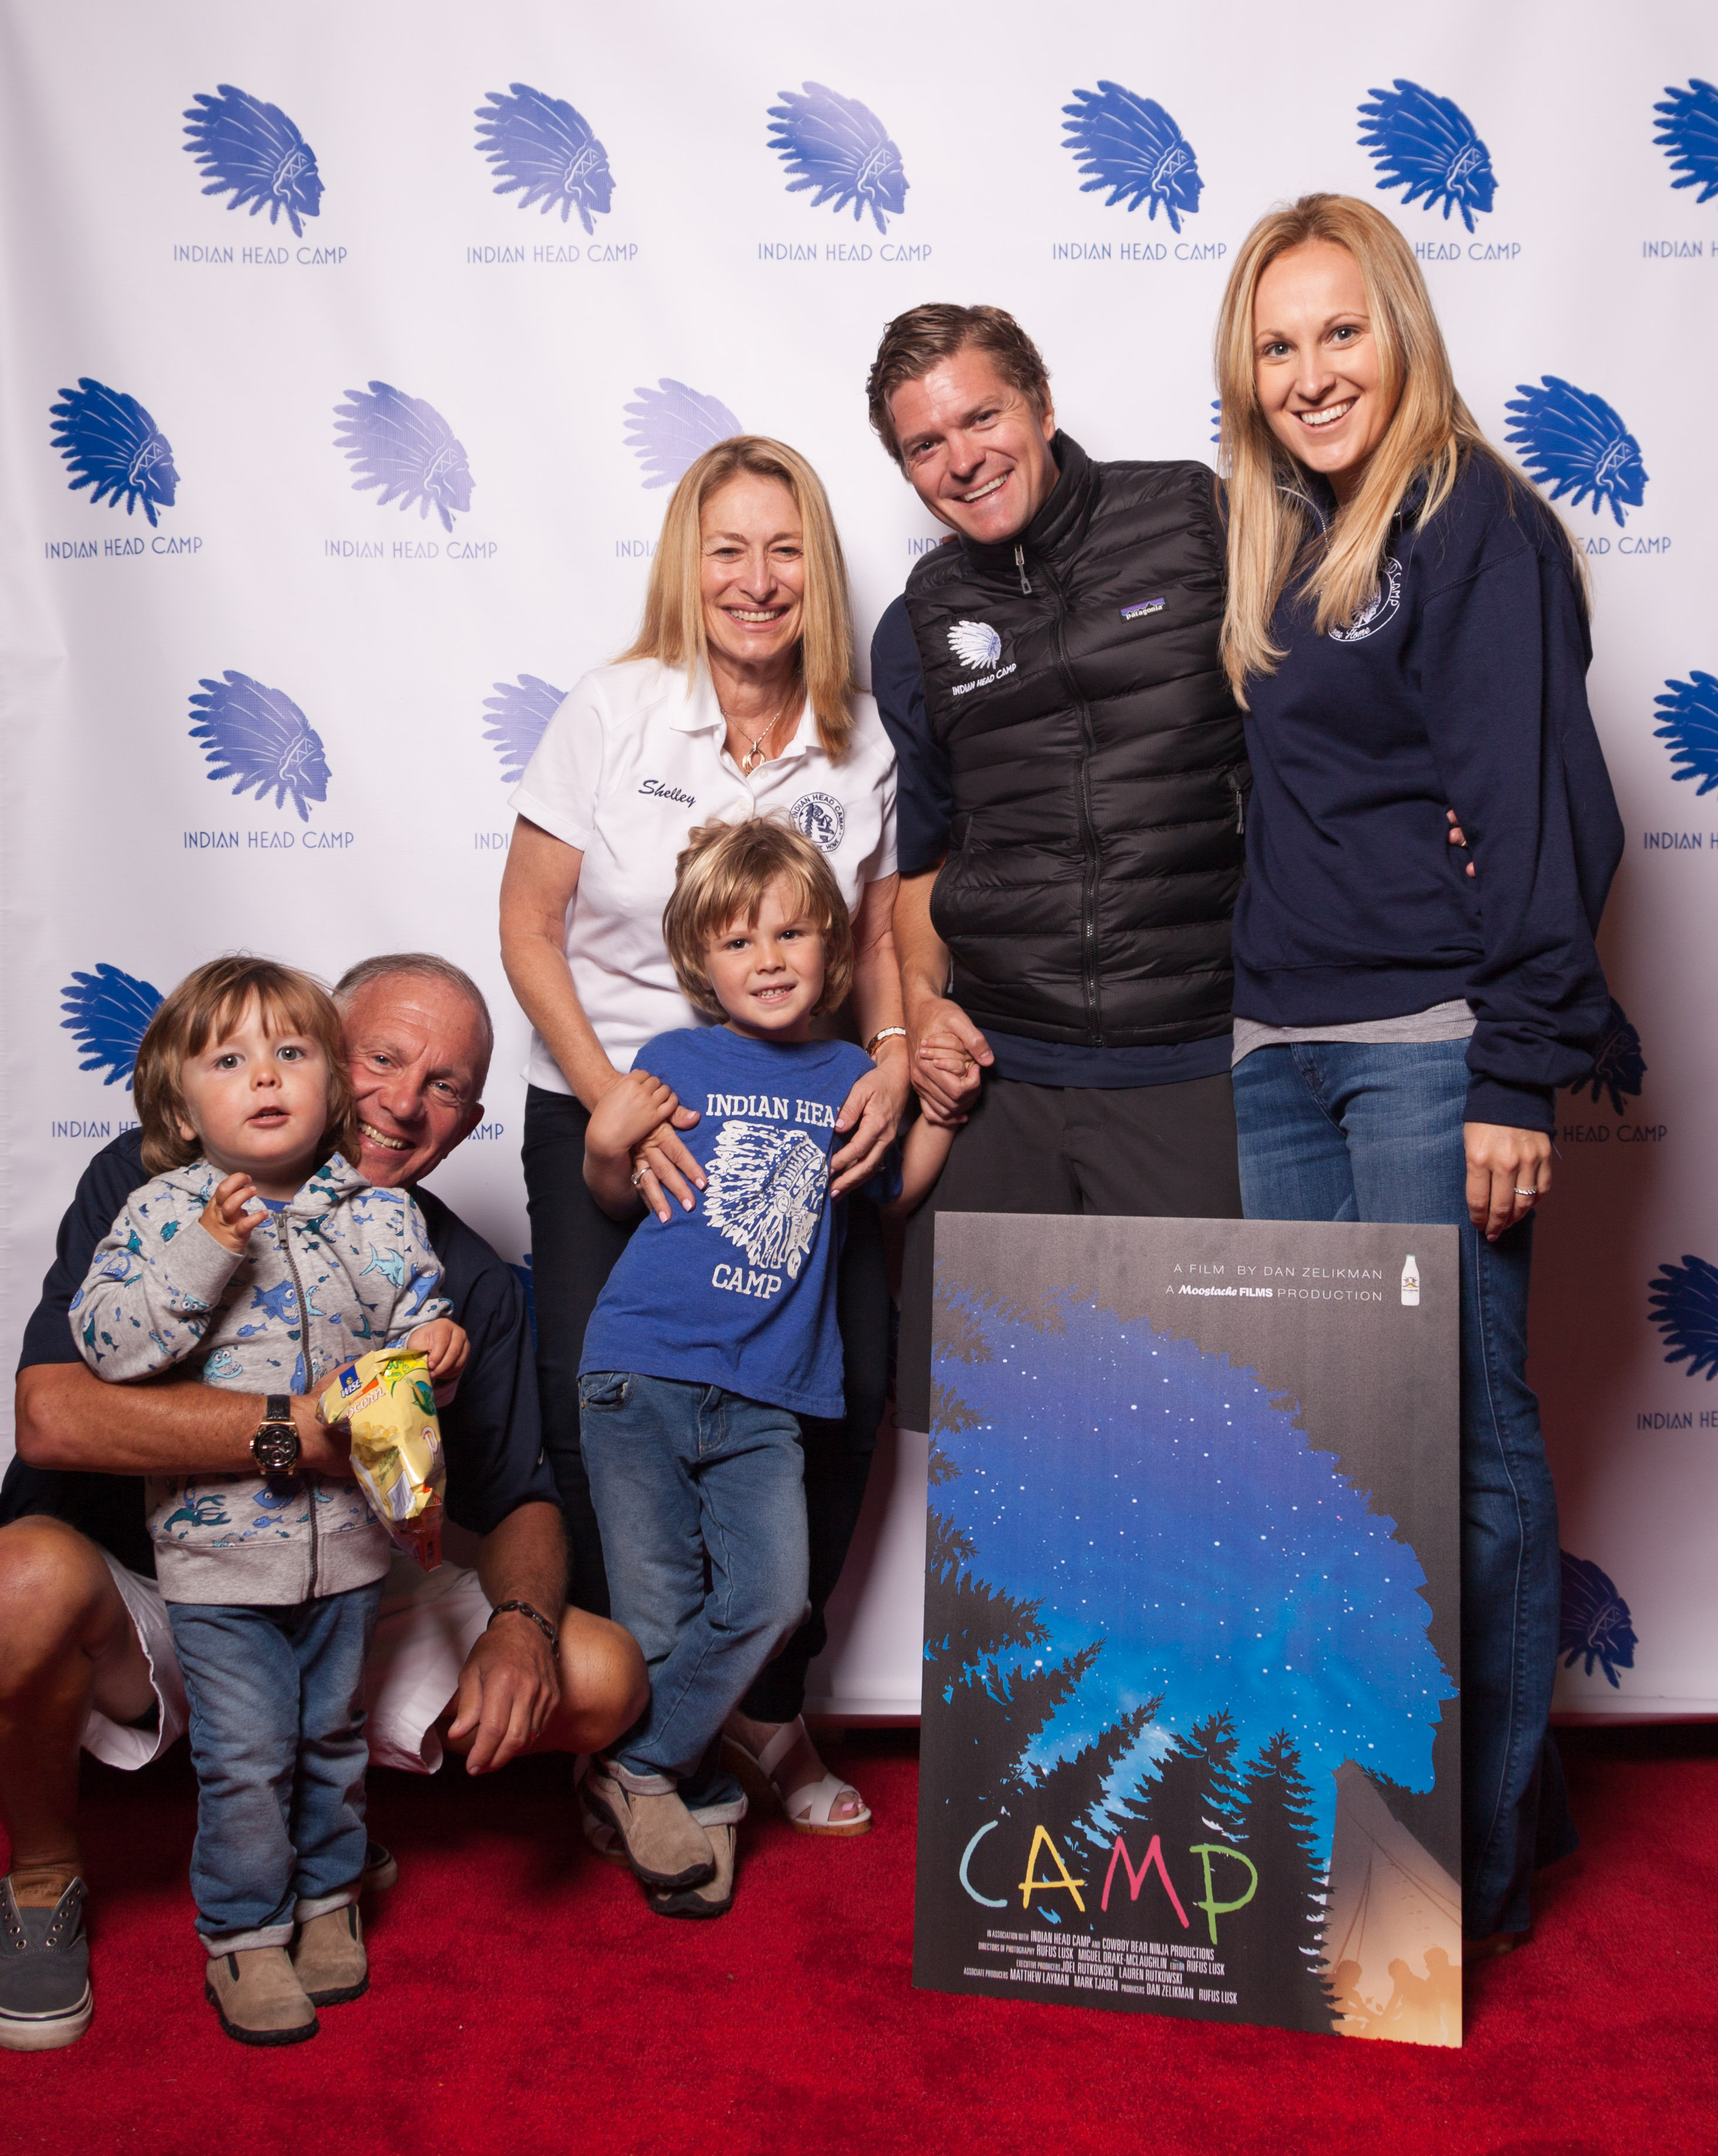 Executive Producers Joel and Lauren Rutkowski with their sons Oakley and Mac, along with Dave and Shelley Tager at the premier of Camp at the Tarrytown Music Hall in New York.